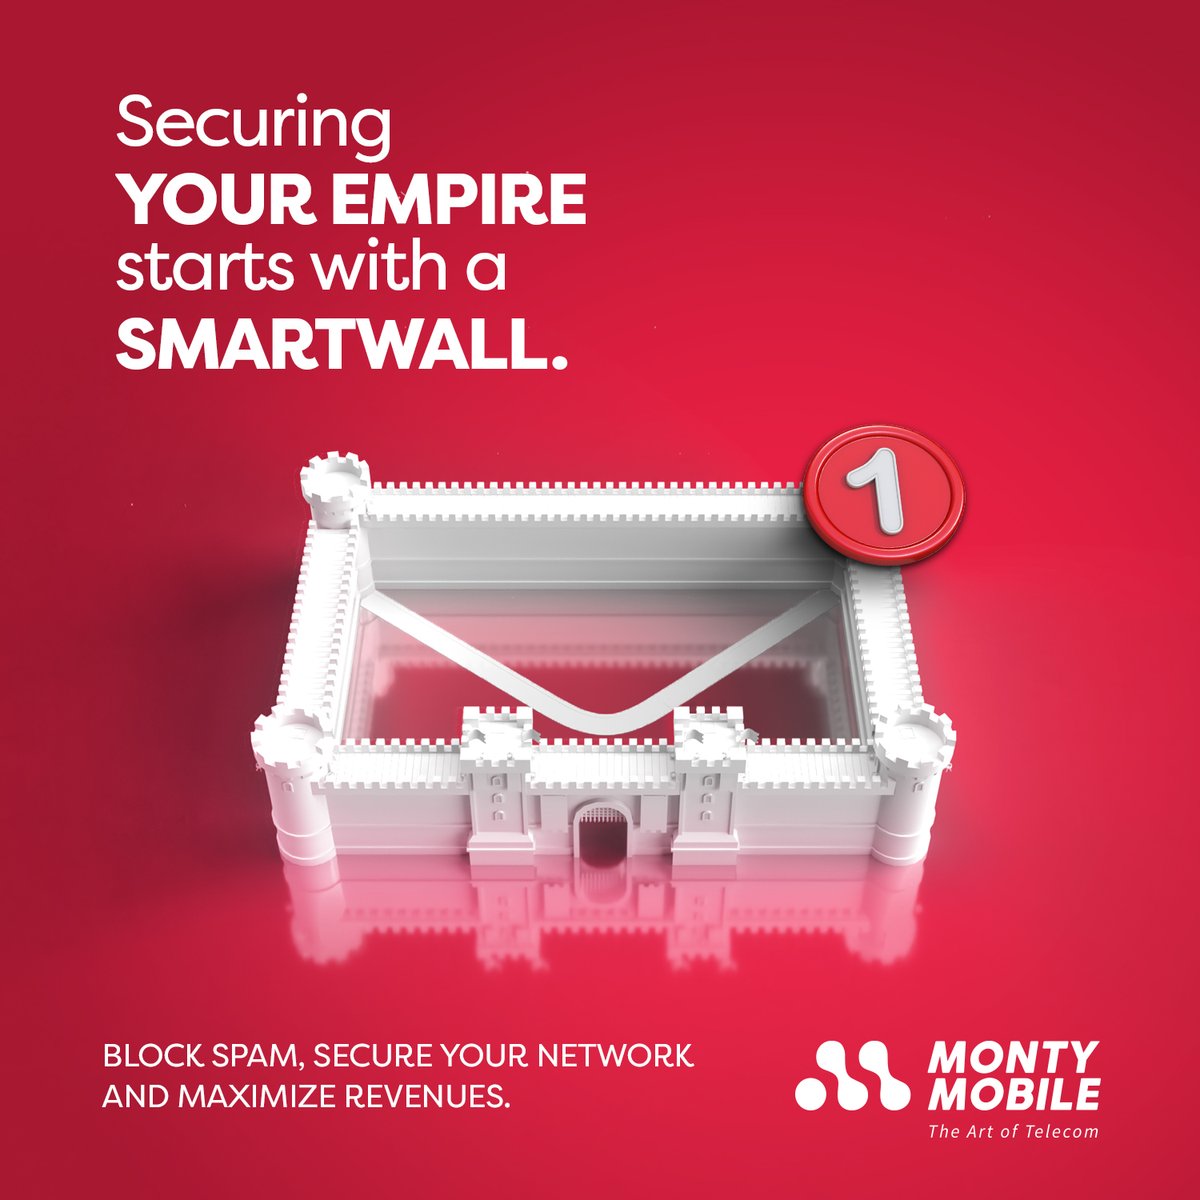 Not every SMS Firewall will protect your empire, but SMARTWALL will!

#montymobile #telecom #smartwall